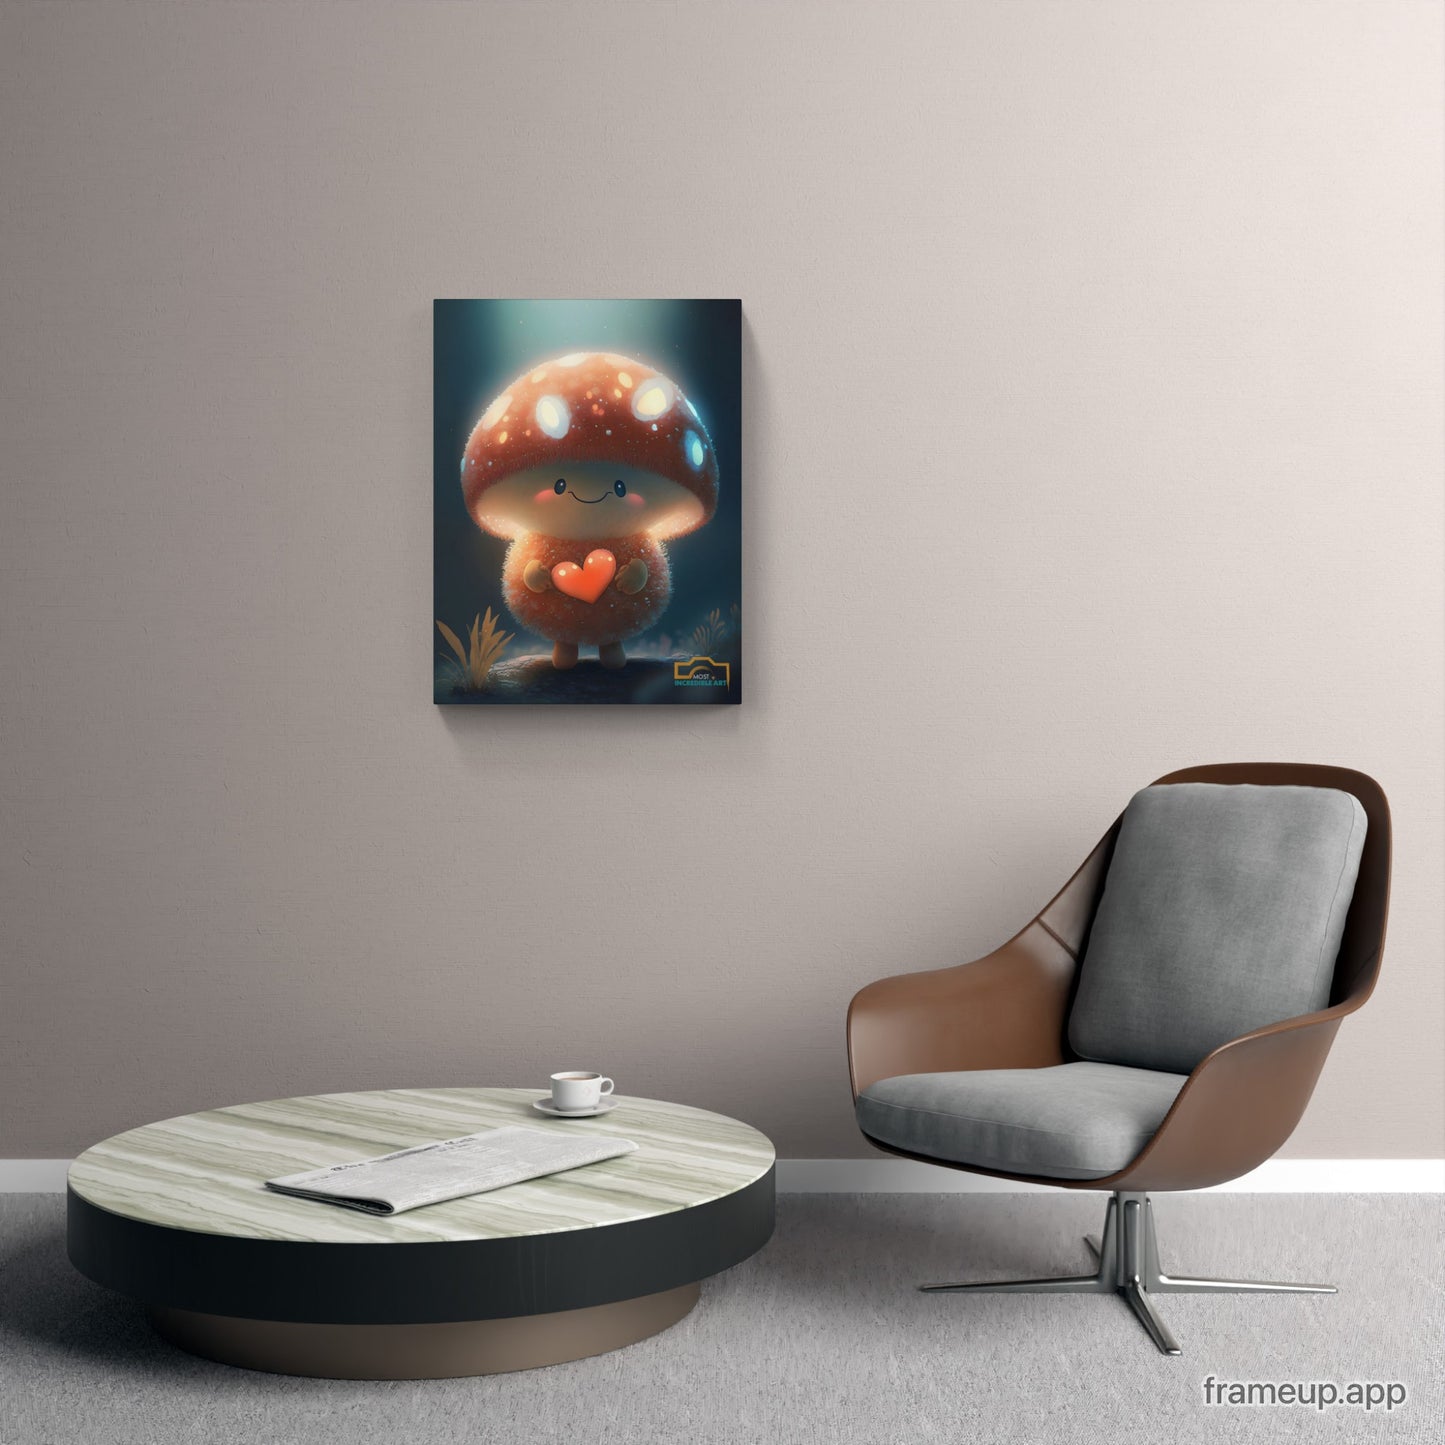 A tiny Anthropomorphic mushroom smiling and holding a heart - Wall Art